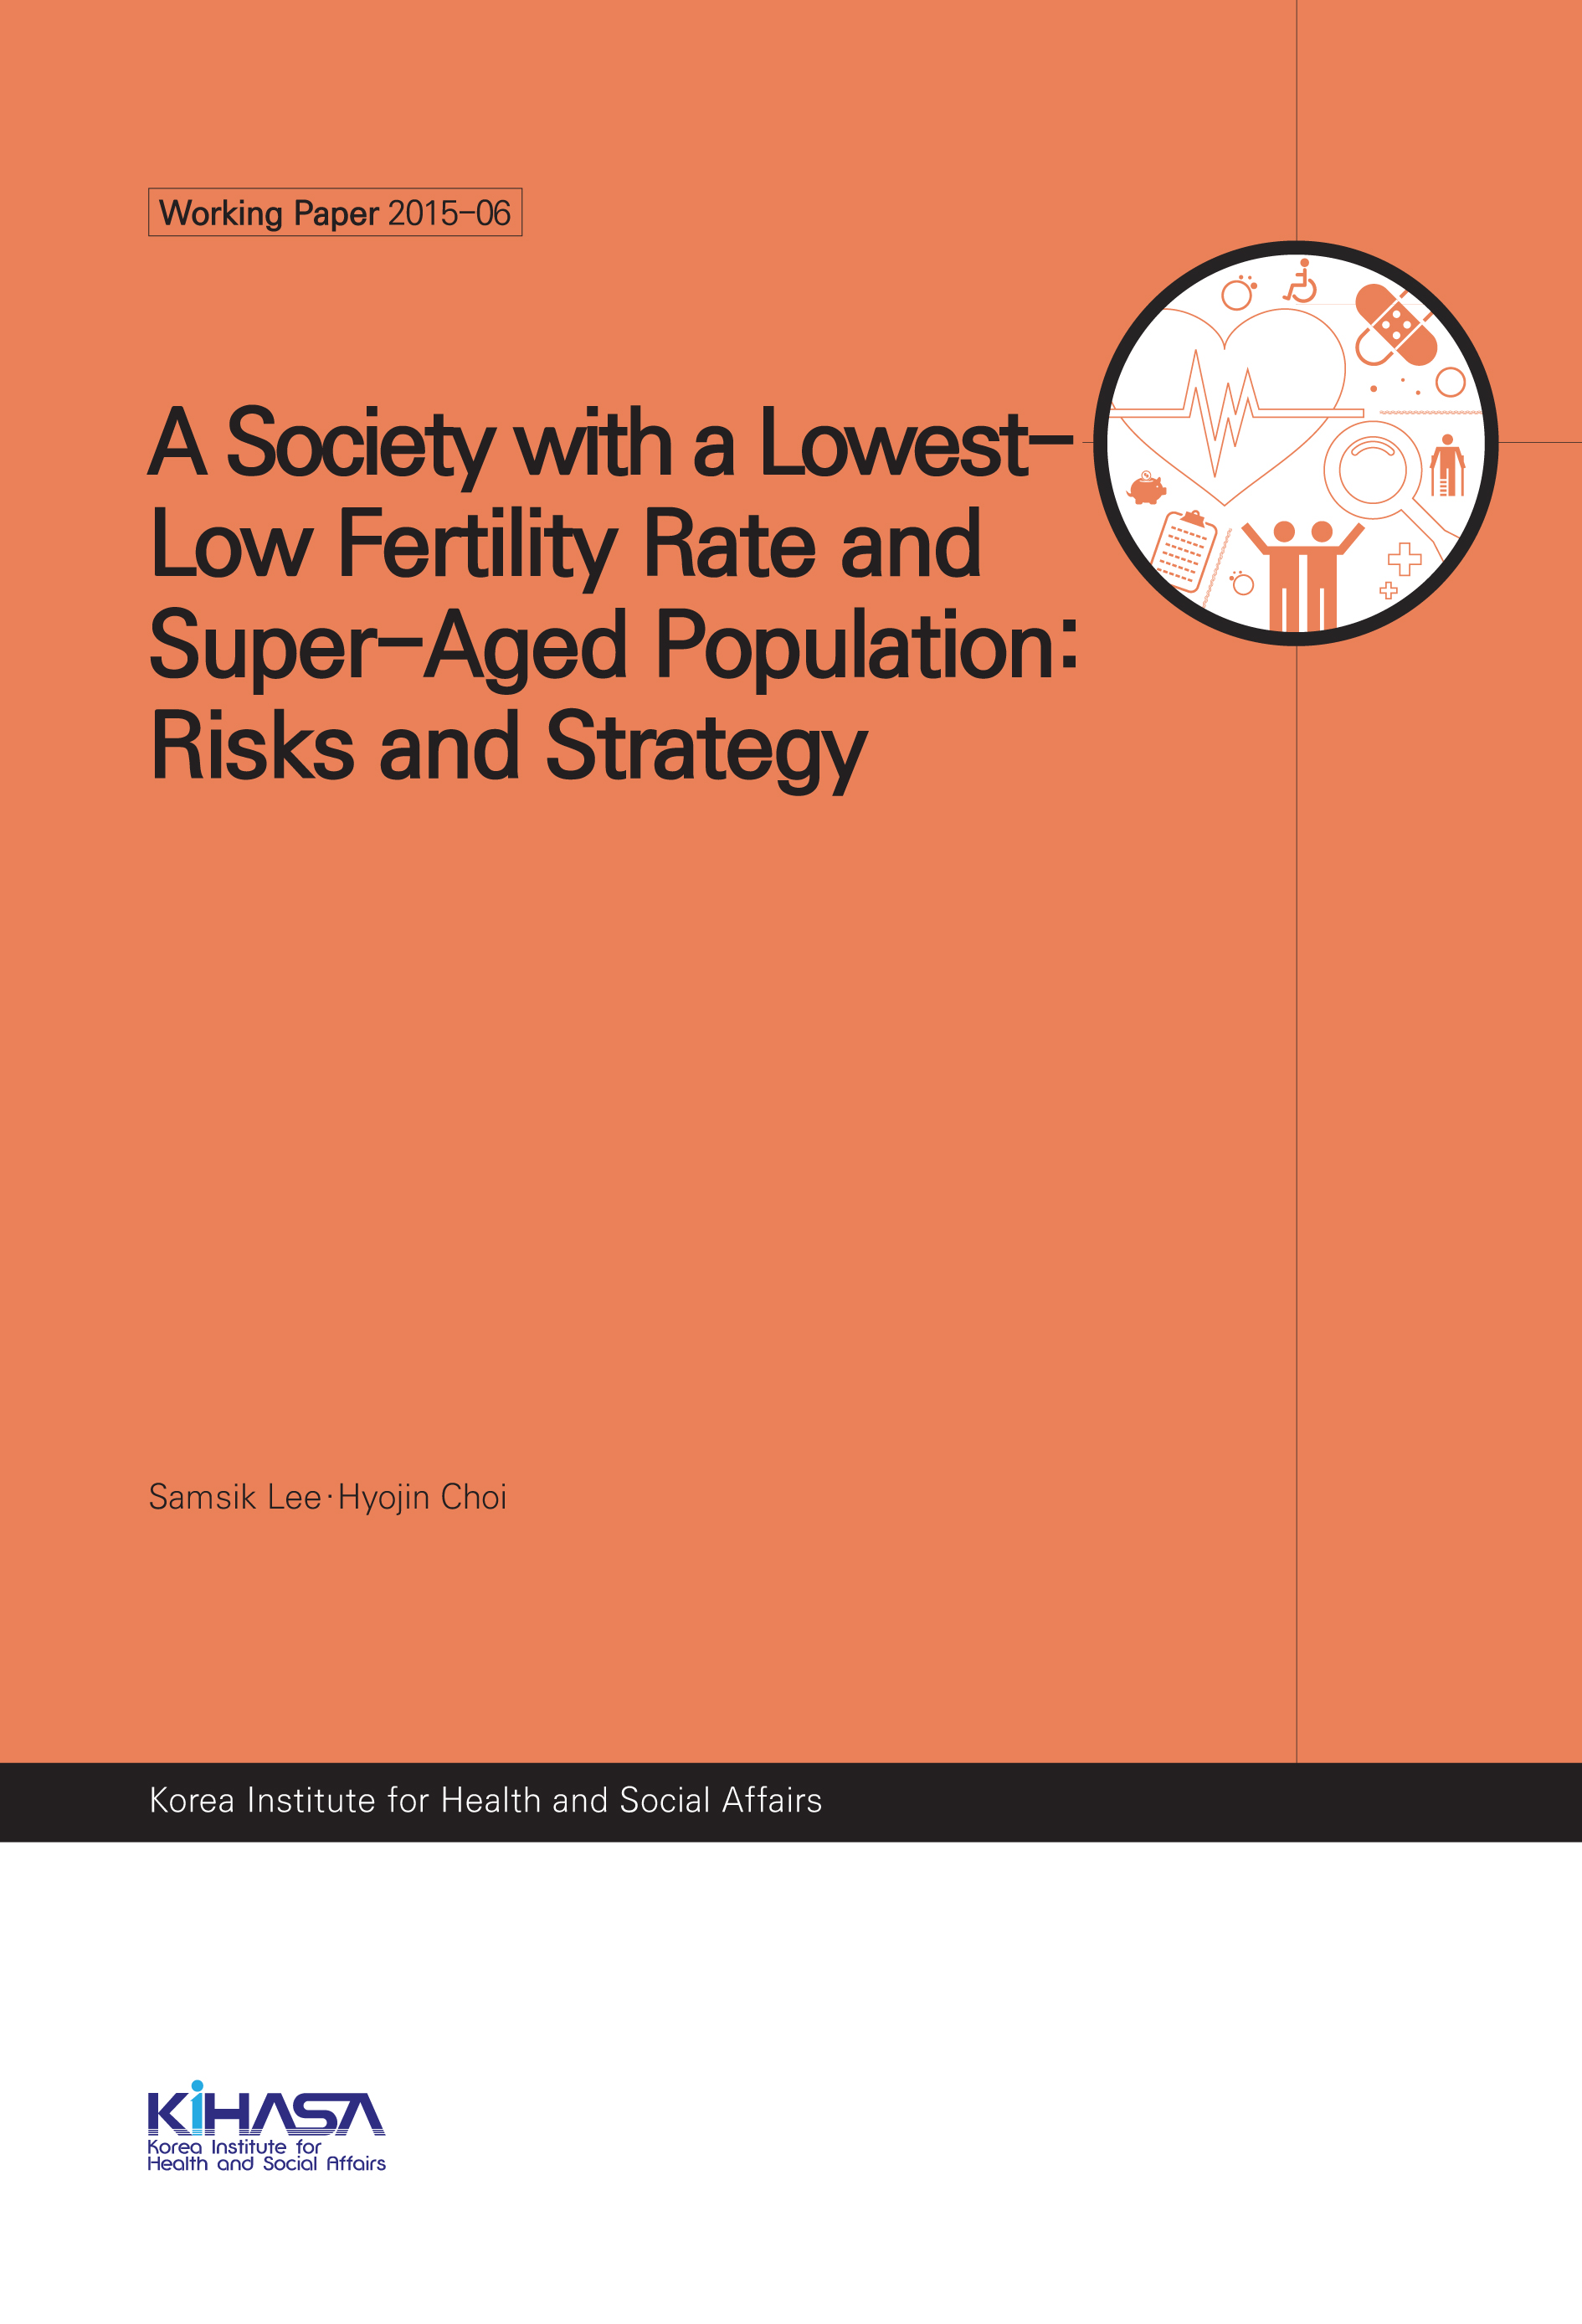 A Society with a Lowest-Low Fertility Rate and Super-Aged Population: Risks and Strategy